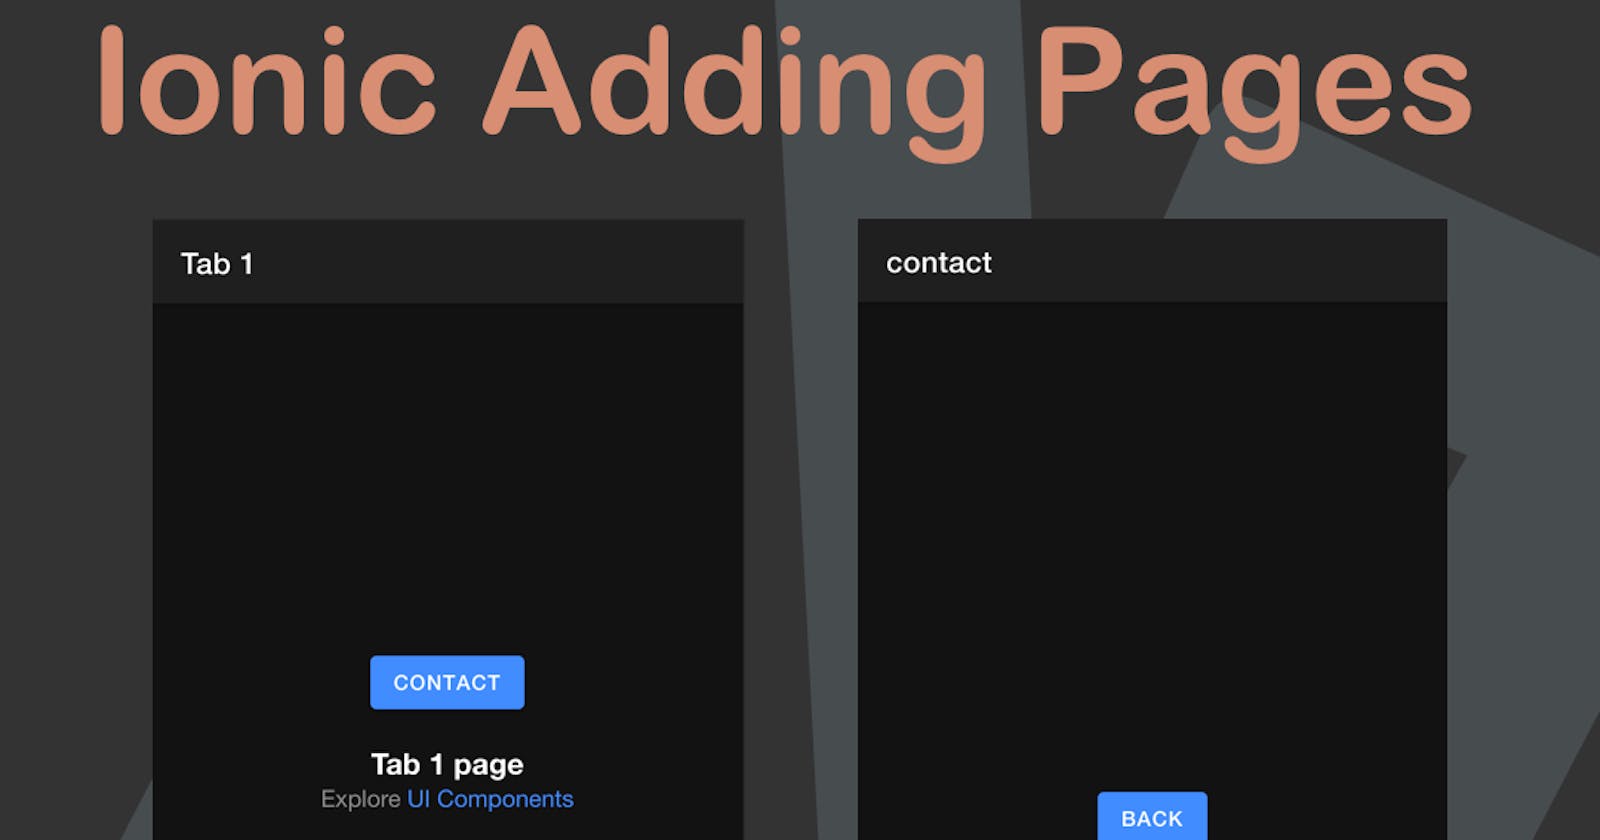 Ionic Adding Pages